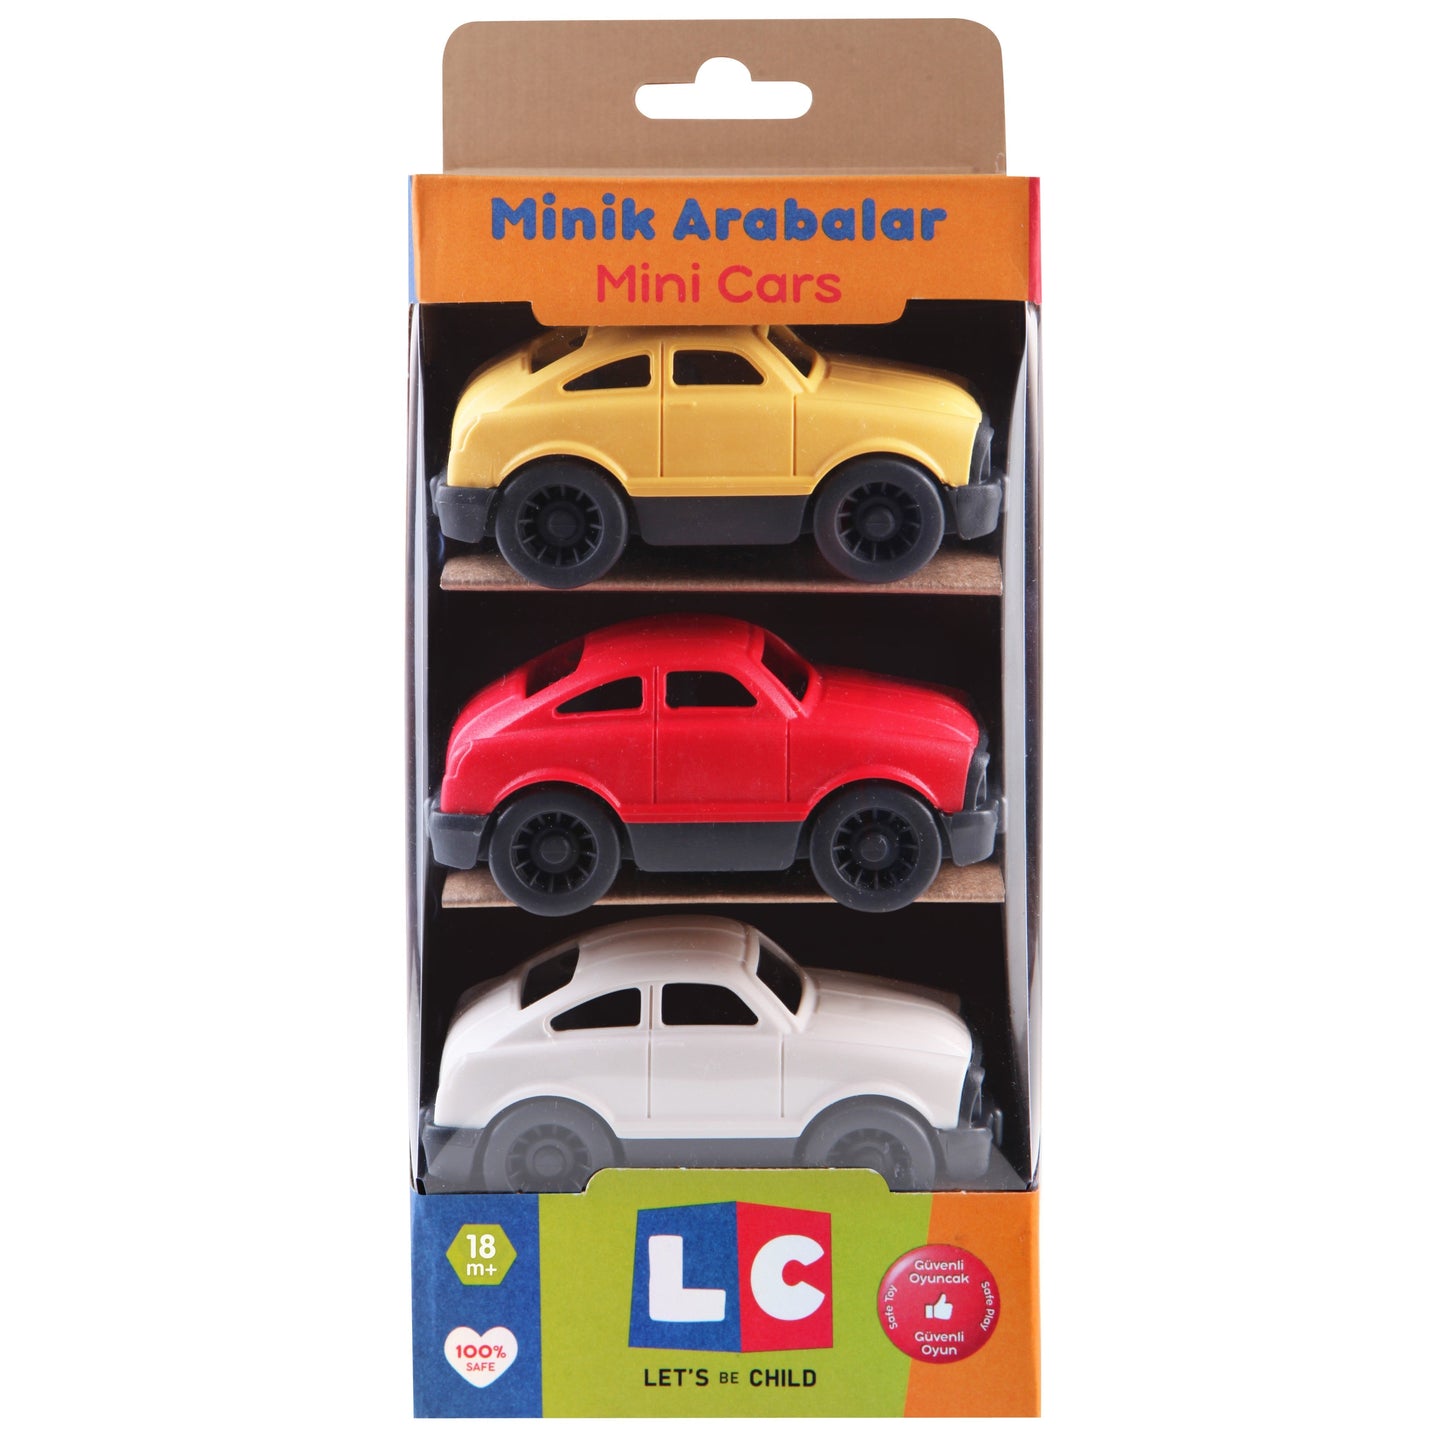 Red-White-Yellow Mini Cars (3pcs)-Car, cat18m+, catveh, Classic, Communication, Coordination, Imagination, Language, Motor, Multicolor, Pretend, Race, Toy, Wheels-Let's Be Child-[Too Twee]-[Tootwee]-[baby]-[newborn]-[clothes]-[essentials]-[toys]-[Lebanon]